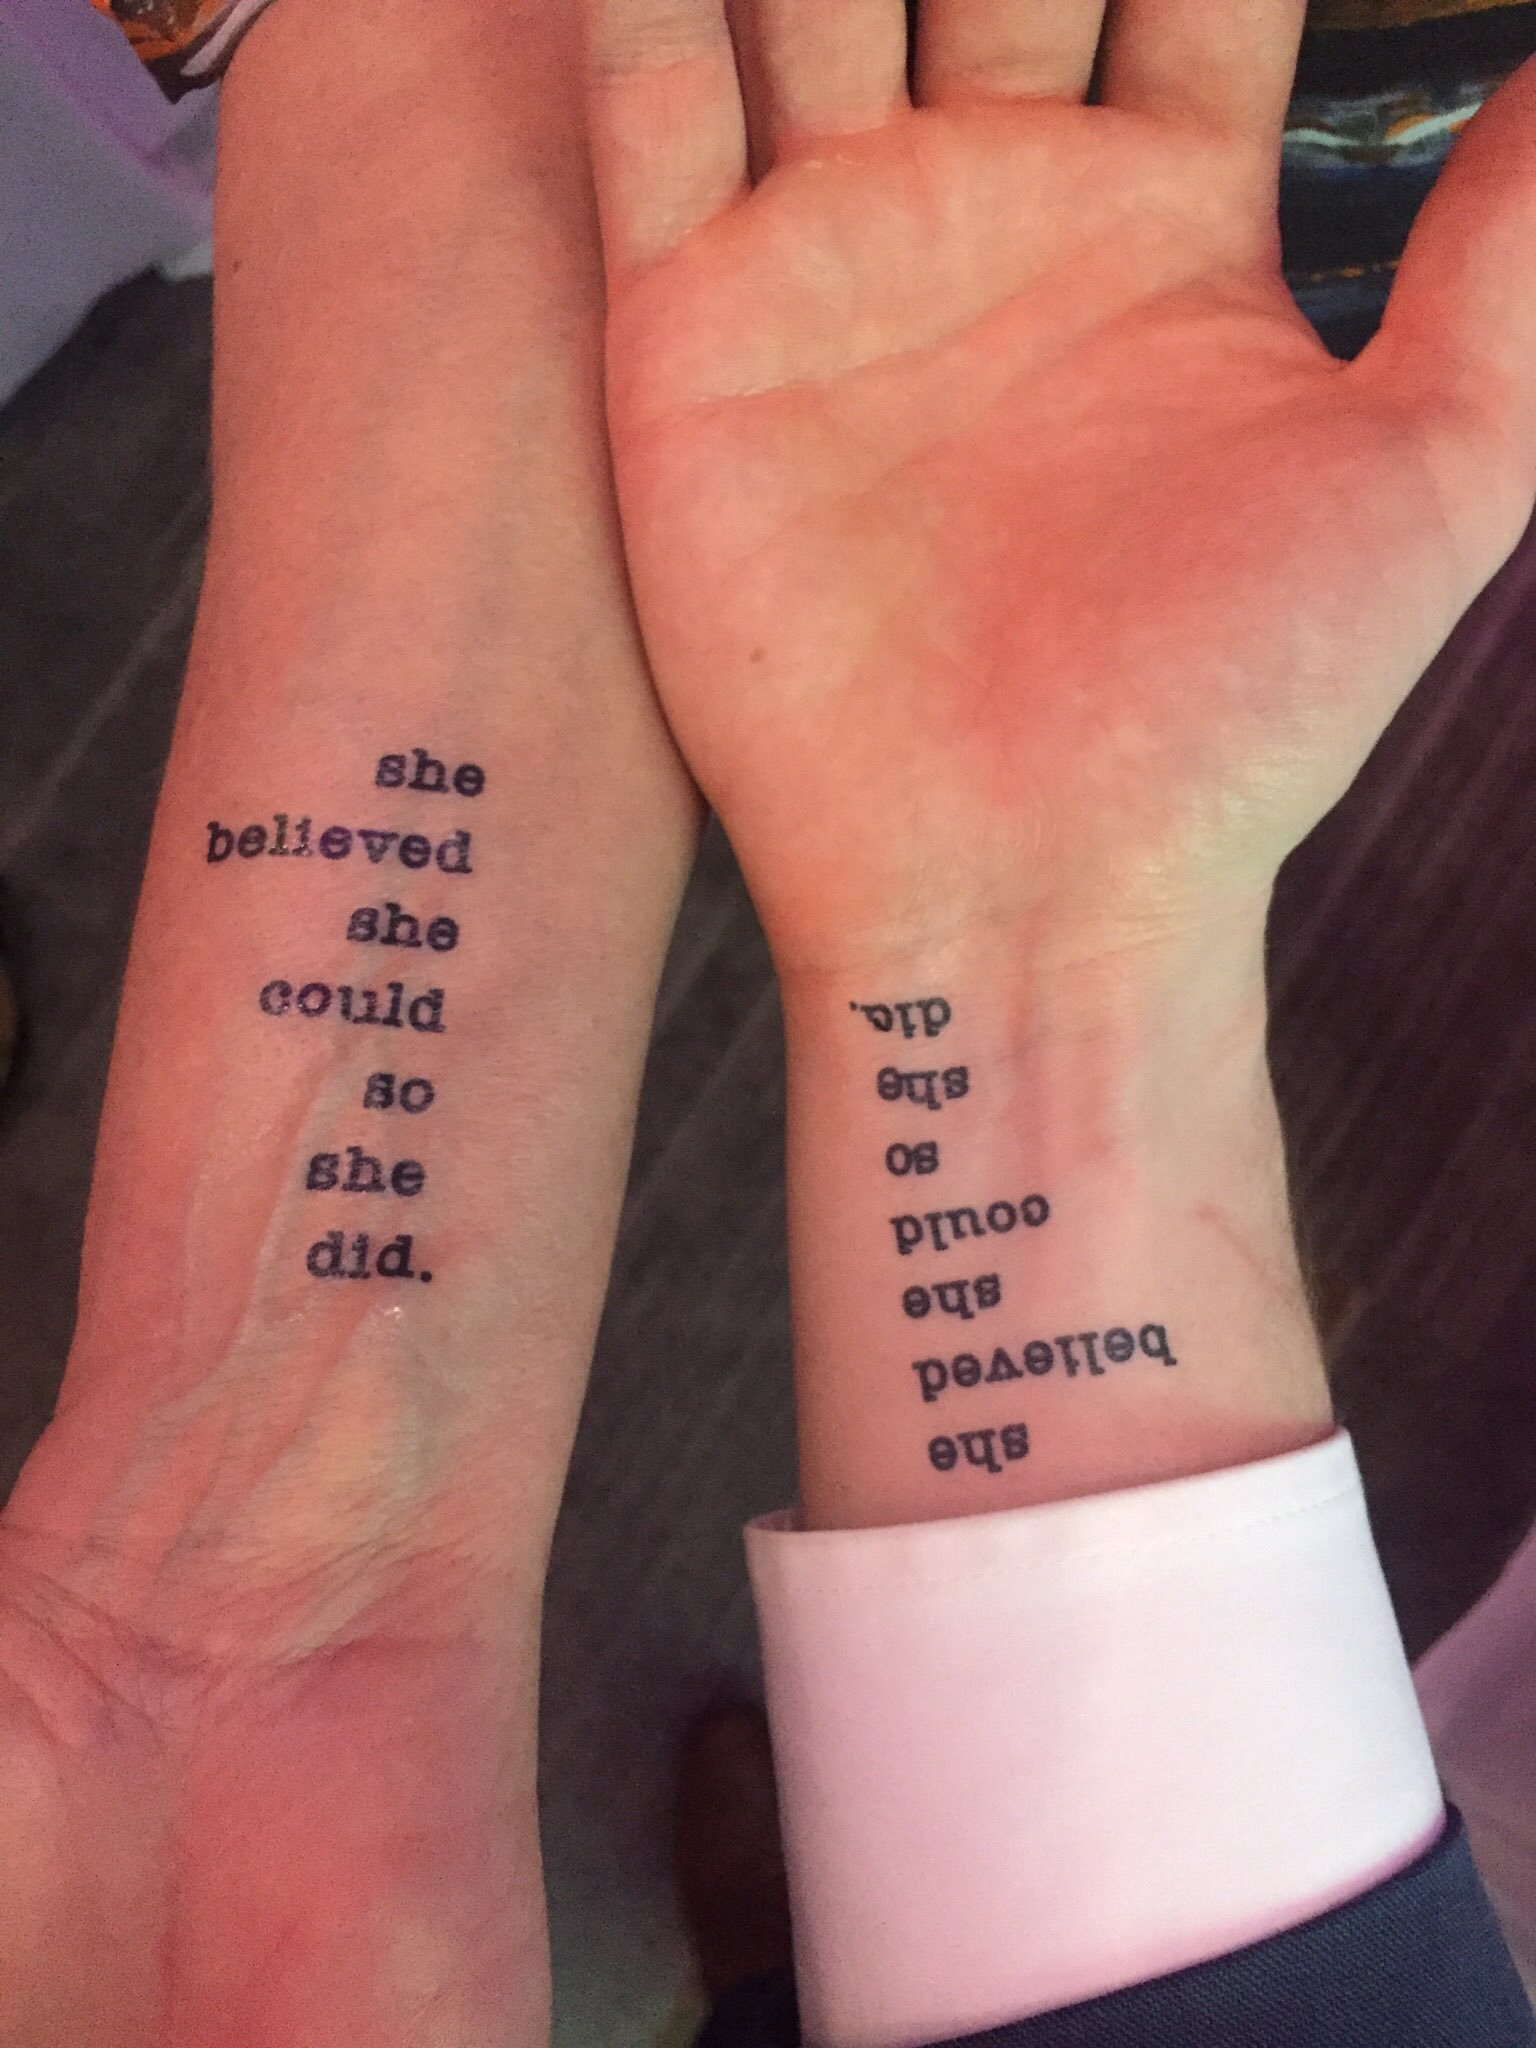 Independent Tattoo Company  Fun motherson matching tattoos by  cody2wilson Thank you christinadubach  fun lovelife  independenttattoocompany tattoosbycody independenttattoocompanycom  blackngrey blackngreytattoo greywash greywashtattoo 